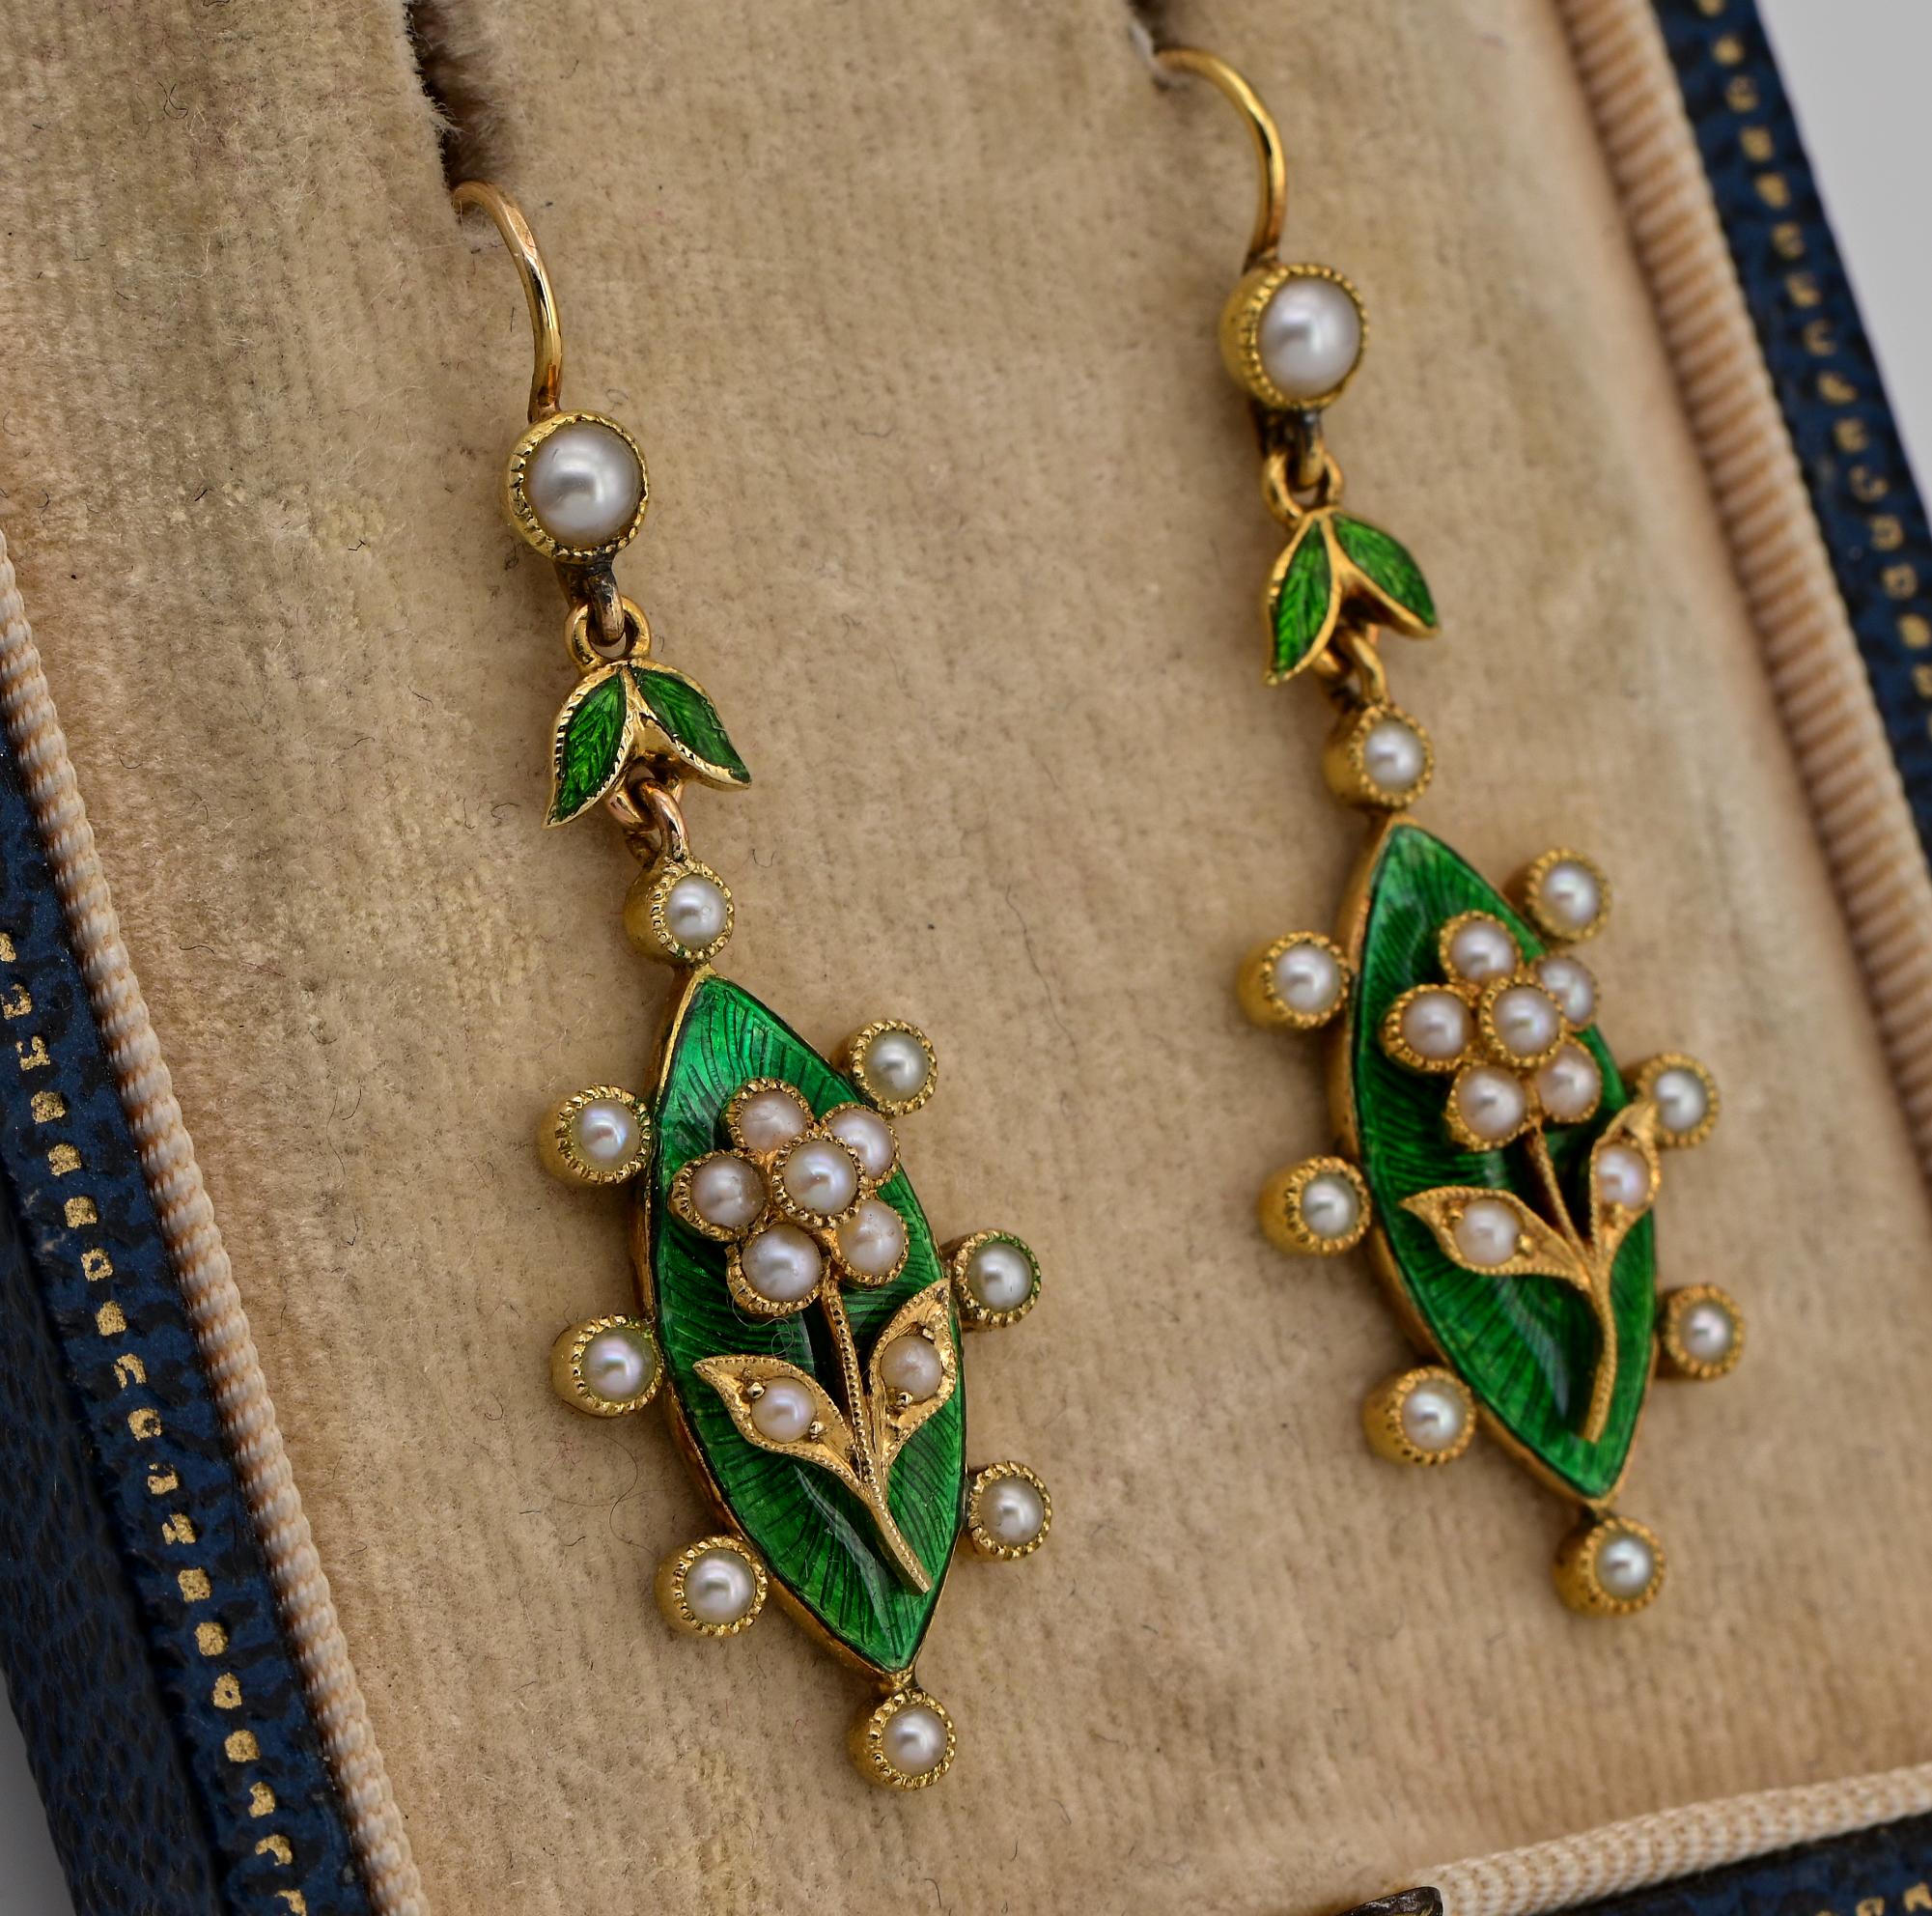 Forget Me Not Symbolism
Delightful, romantic and beautiful drop earrings from the 19th century, holding the little Forget Me not flowers, bringing all the sentimental symbolism at the core of its message
Truly glorious in workmanship, accurately